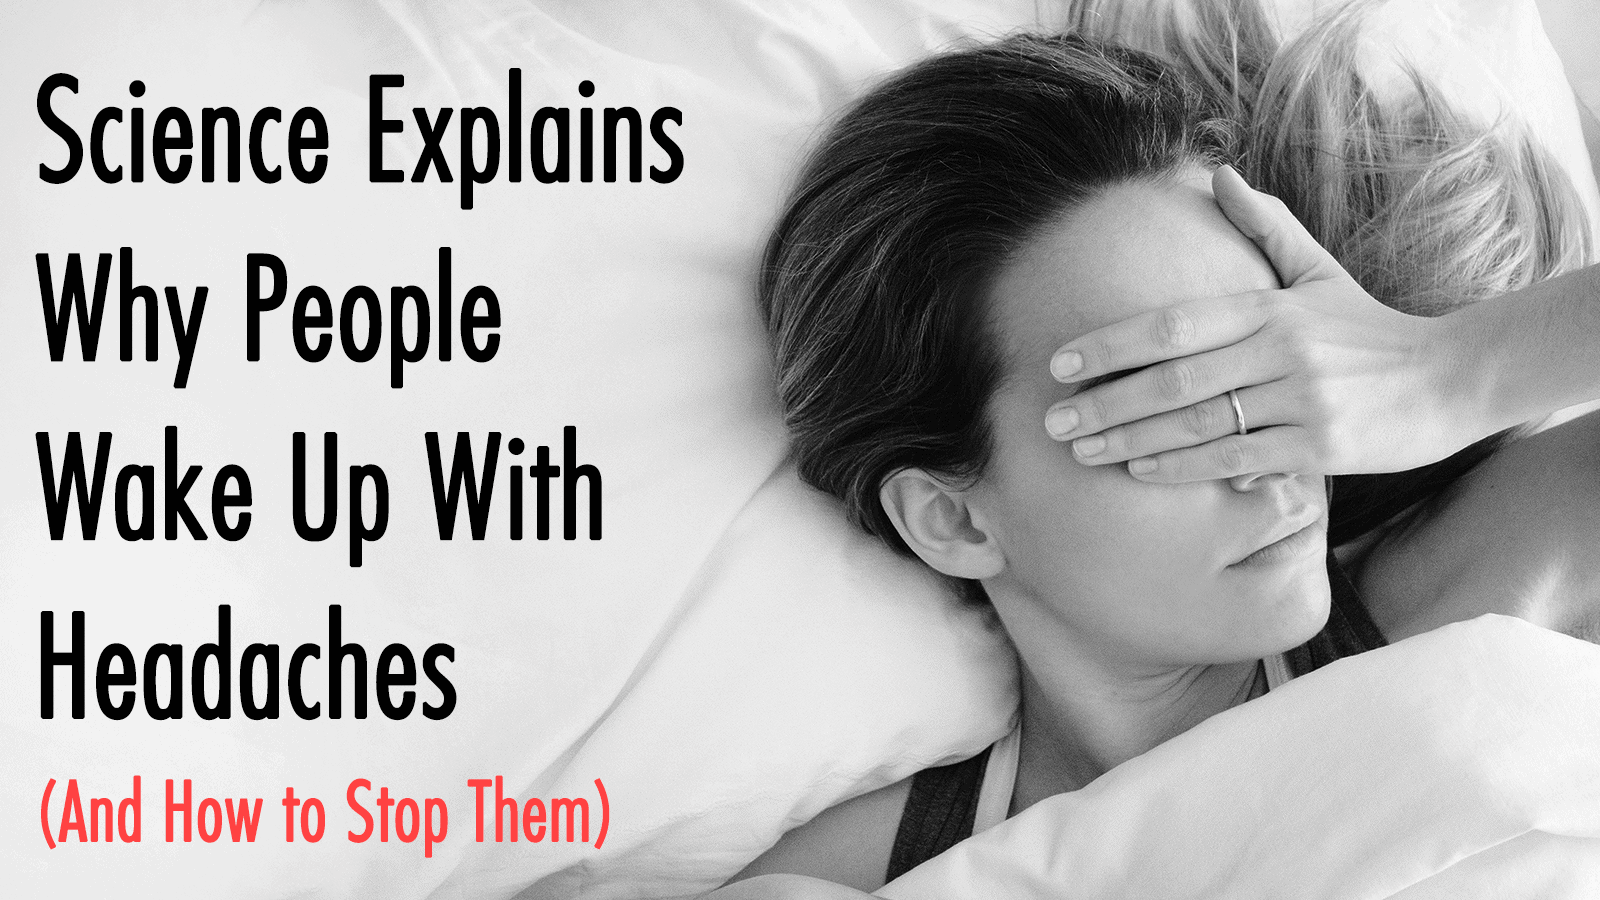 Science Explains Why People Wake Up With Headaches (And How to Stop Them)